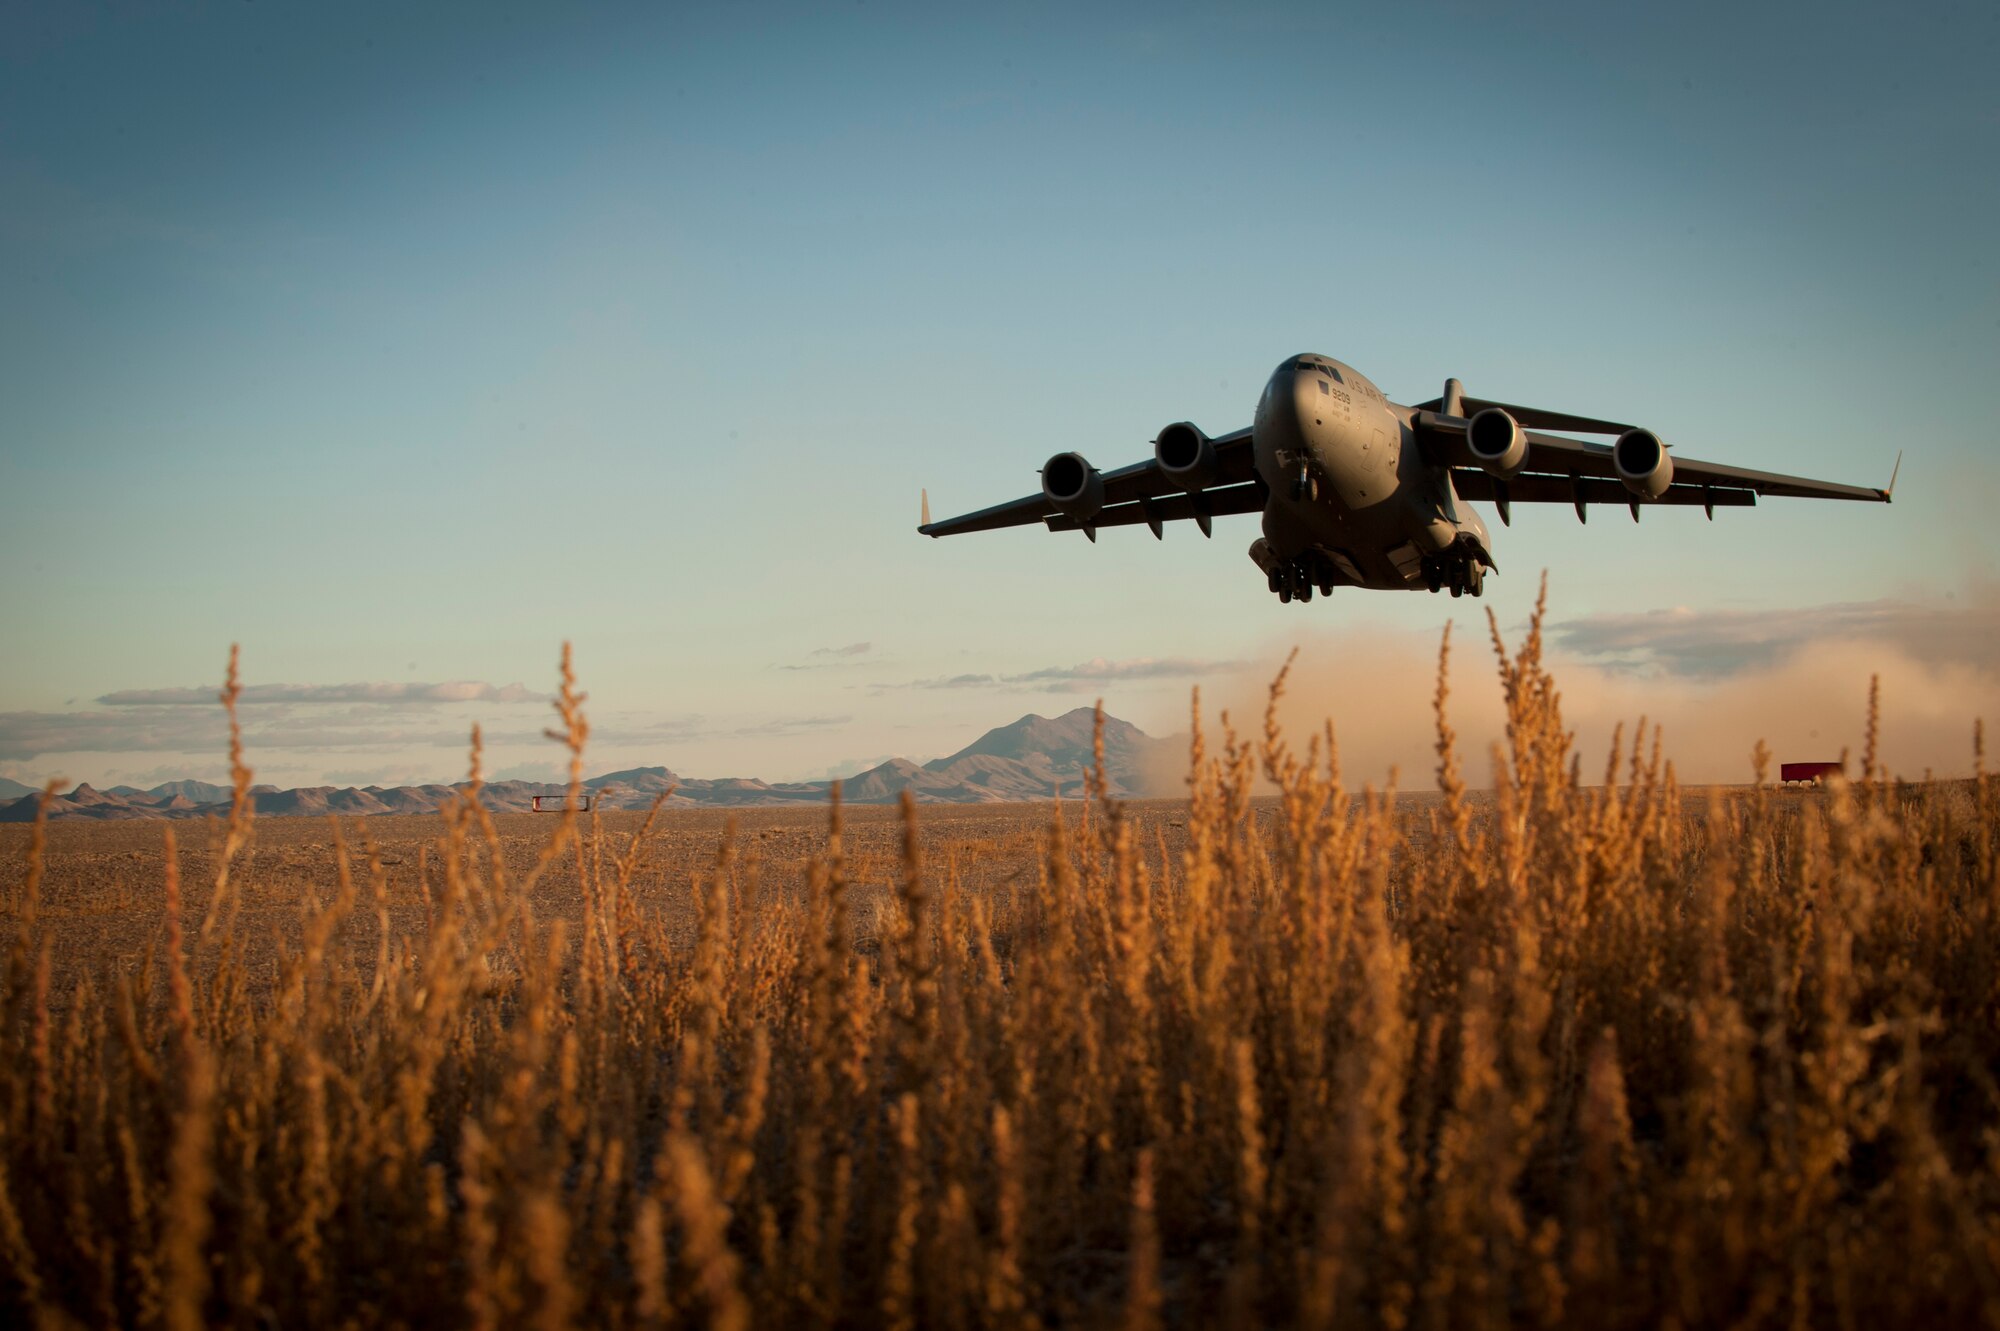 A U.S. Air Force C-17 Globemaster III assigned to March Air Reserve Base, Calif., takes off from a degraded airfield during the U.S. Air Force Weapons School's Joint Forcible Entry Exercise 14B at the Nevada Test and Training Range Dec. 6, 2014. JFEX exercises participants' ability to synchronize aircraft movements from geographically-separated bases, command large formations of dissimilar aircraft in high-threat airspace and tactically deliver and recover combat forces via air drops and combat landings on an unimproved landing strip. (U.S. Air Force photo by Airman First Class Joshua Kleinholz)